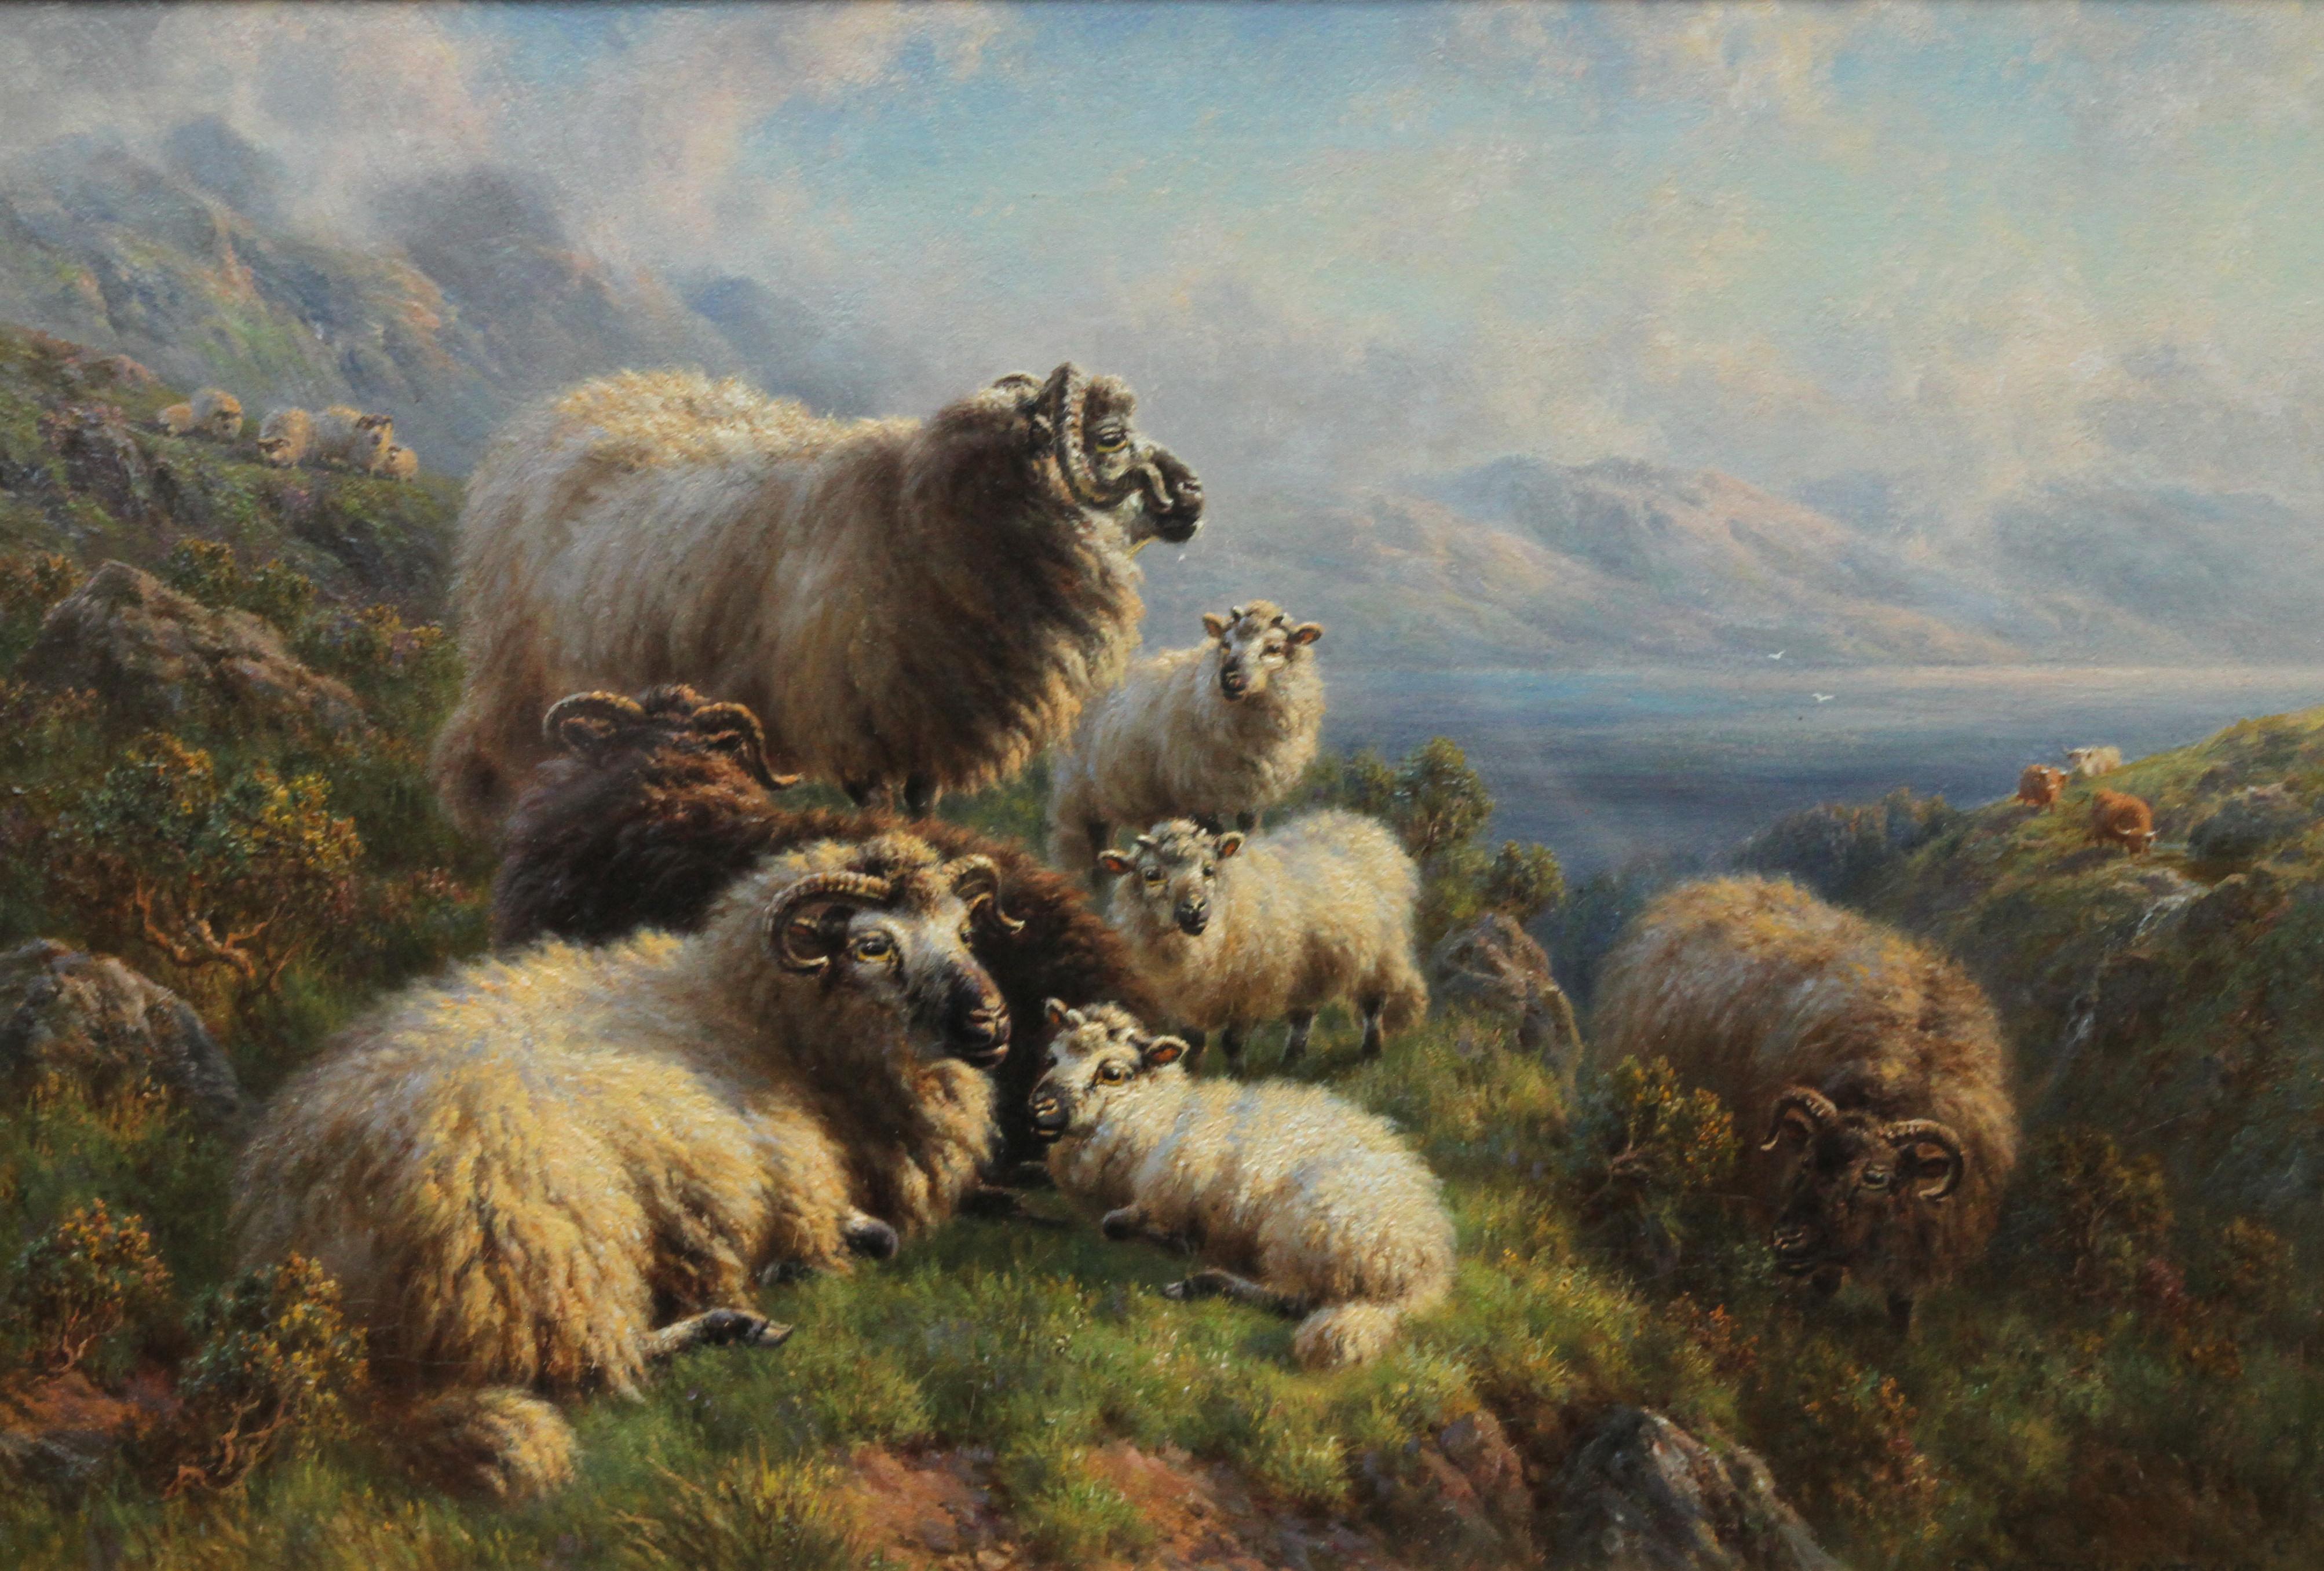 Sheep at Loch Tay Perthshire - British 1910 Edwardian art landscape oil painting 2